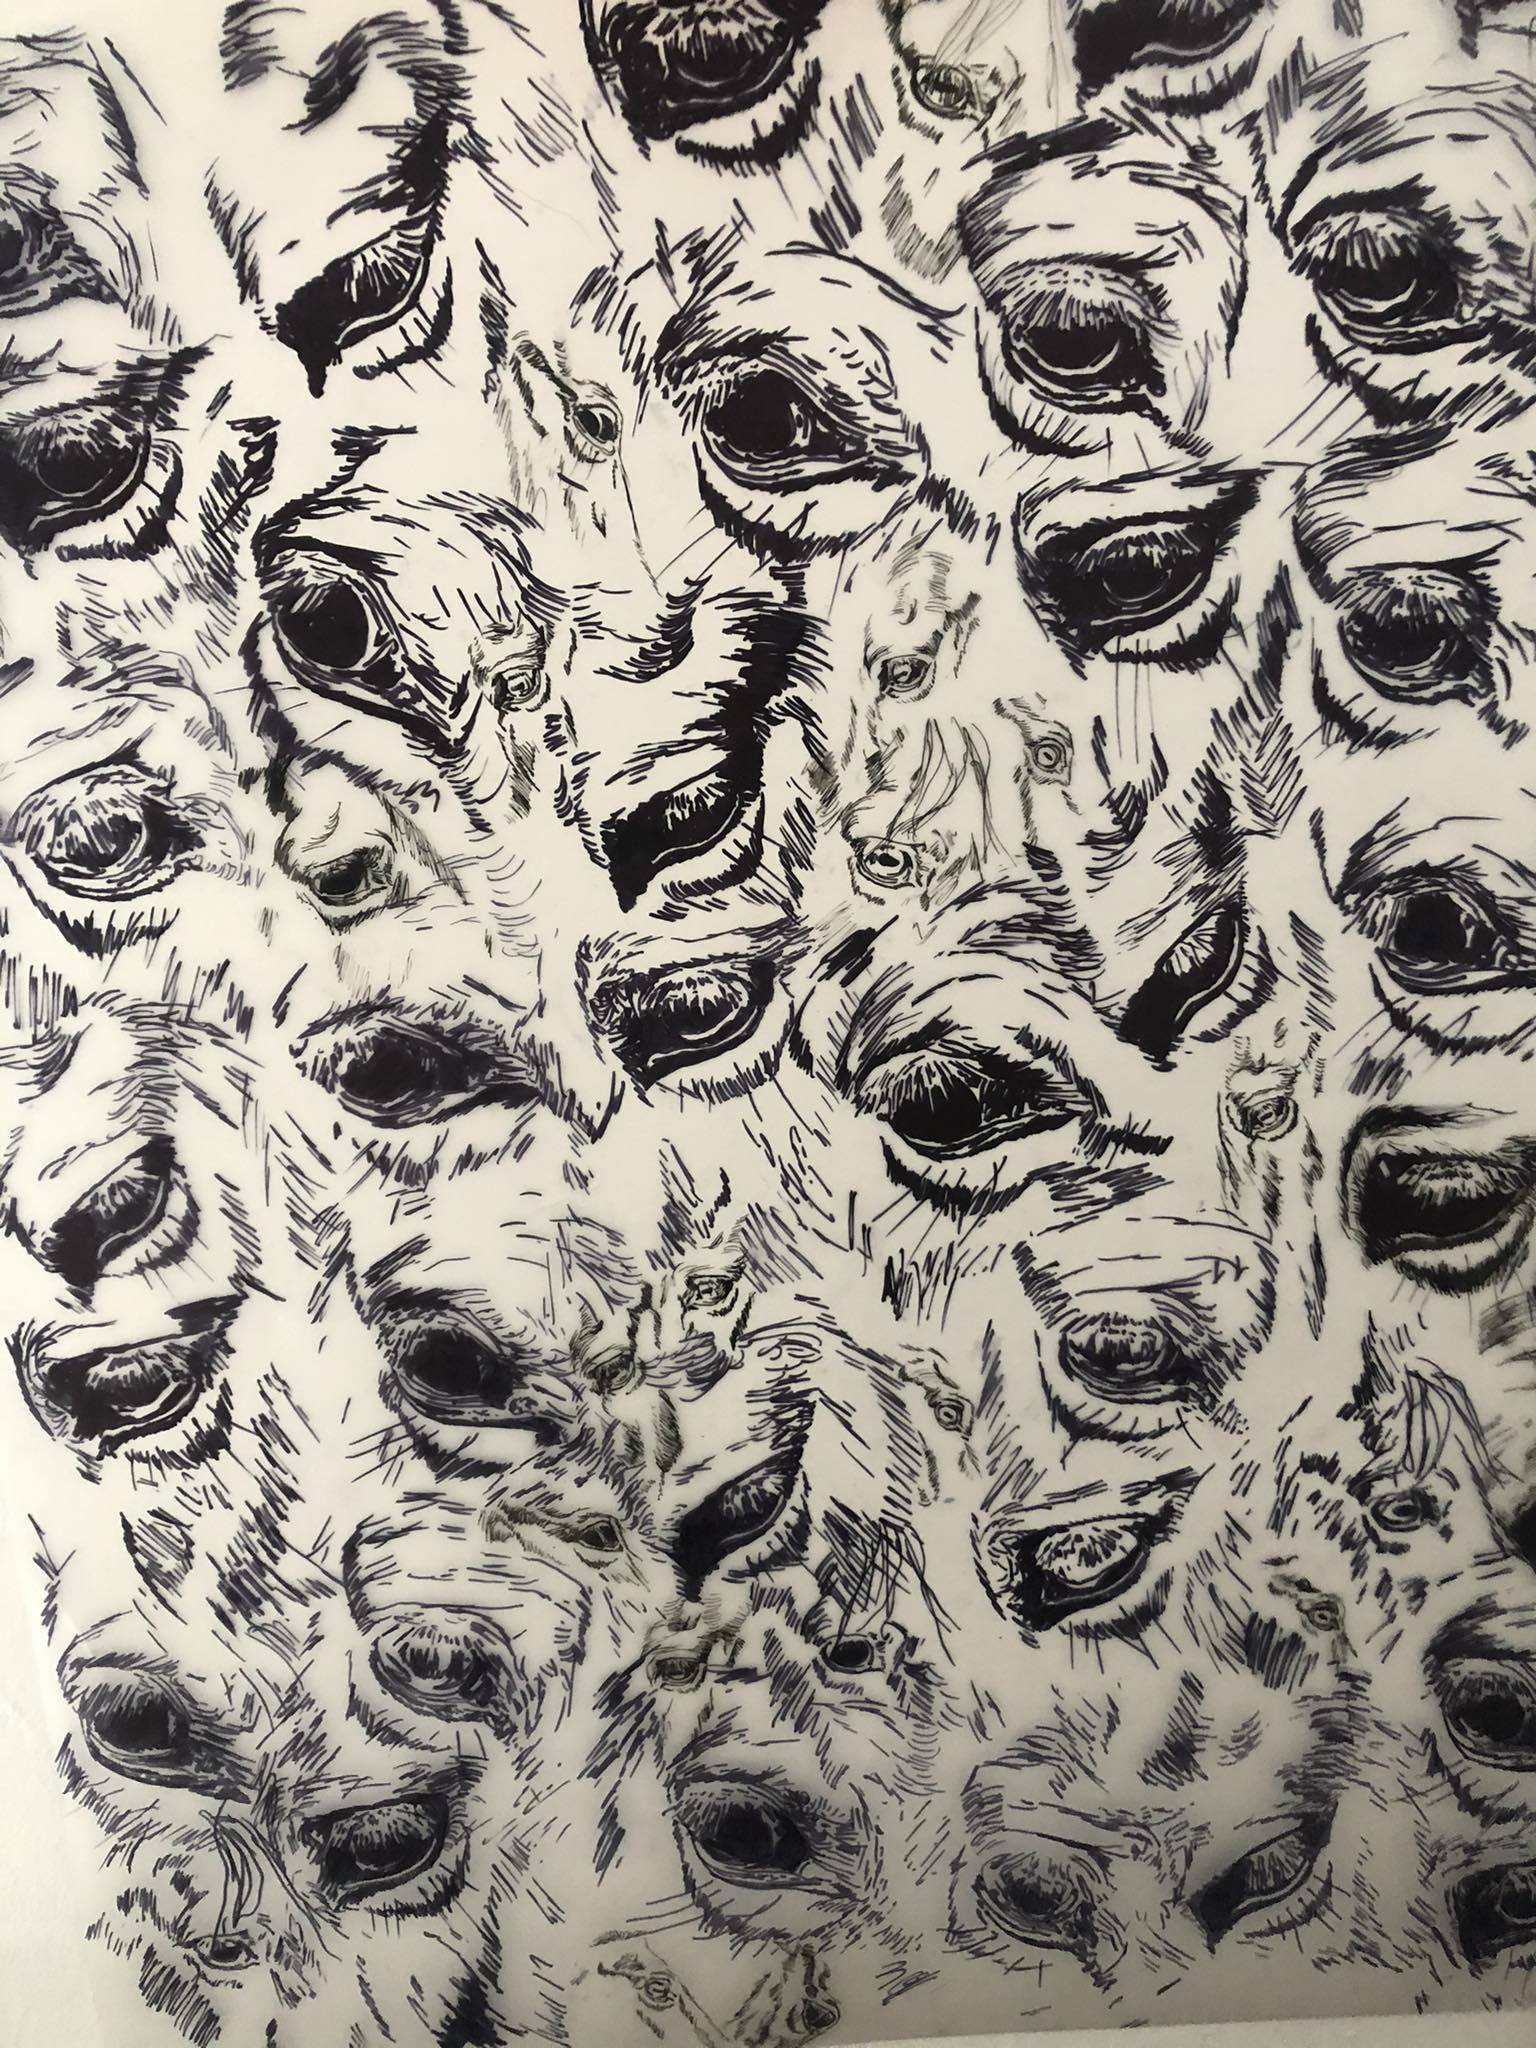 All eyes on you by Shannon Johnston. Pen drawing on acetate. 63cm x 78cm